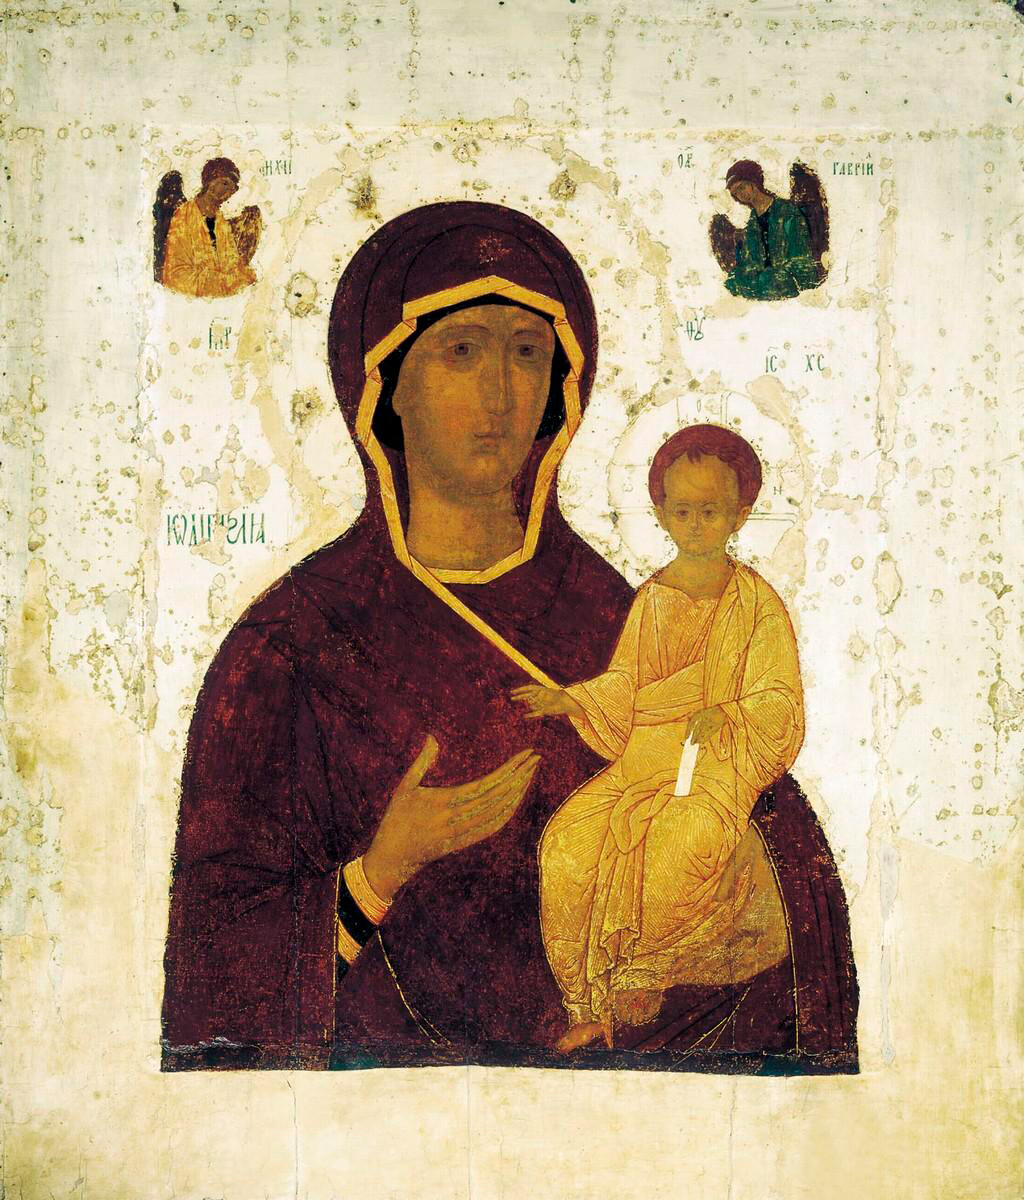 The Smolensk Icon of the Mother of God, circa 1482